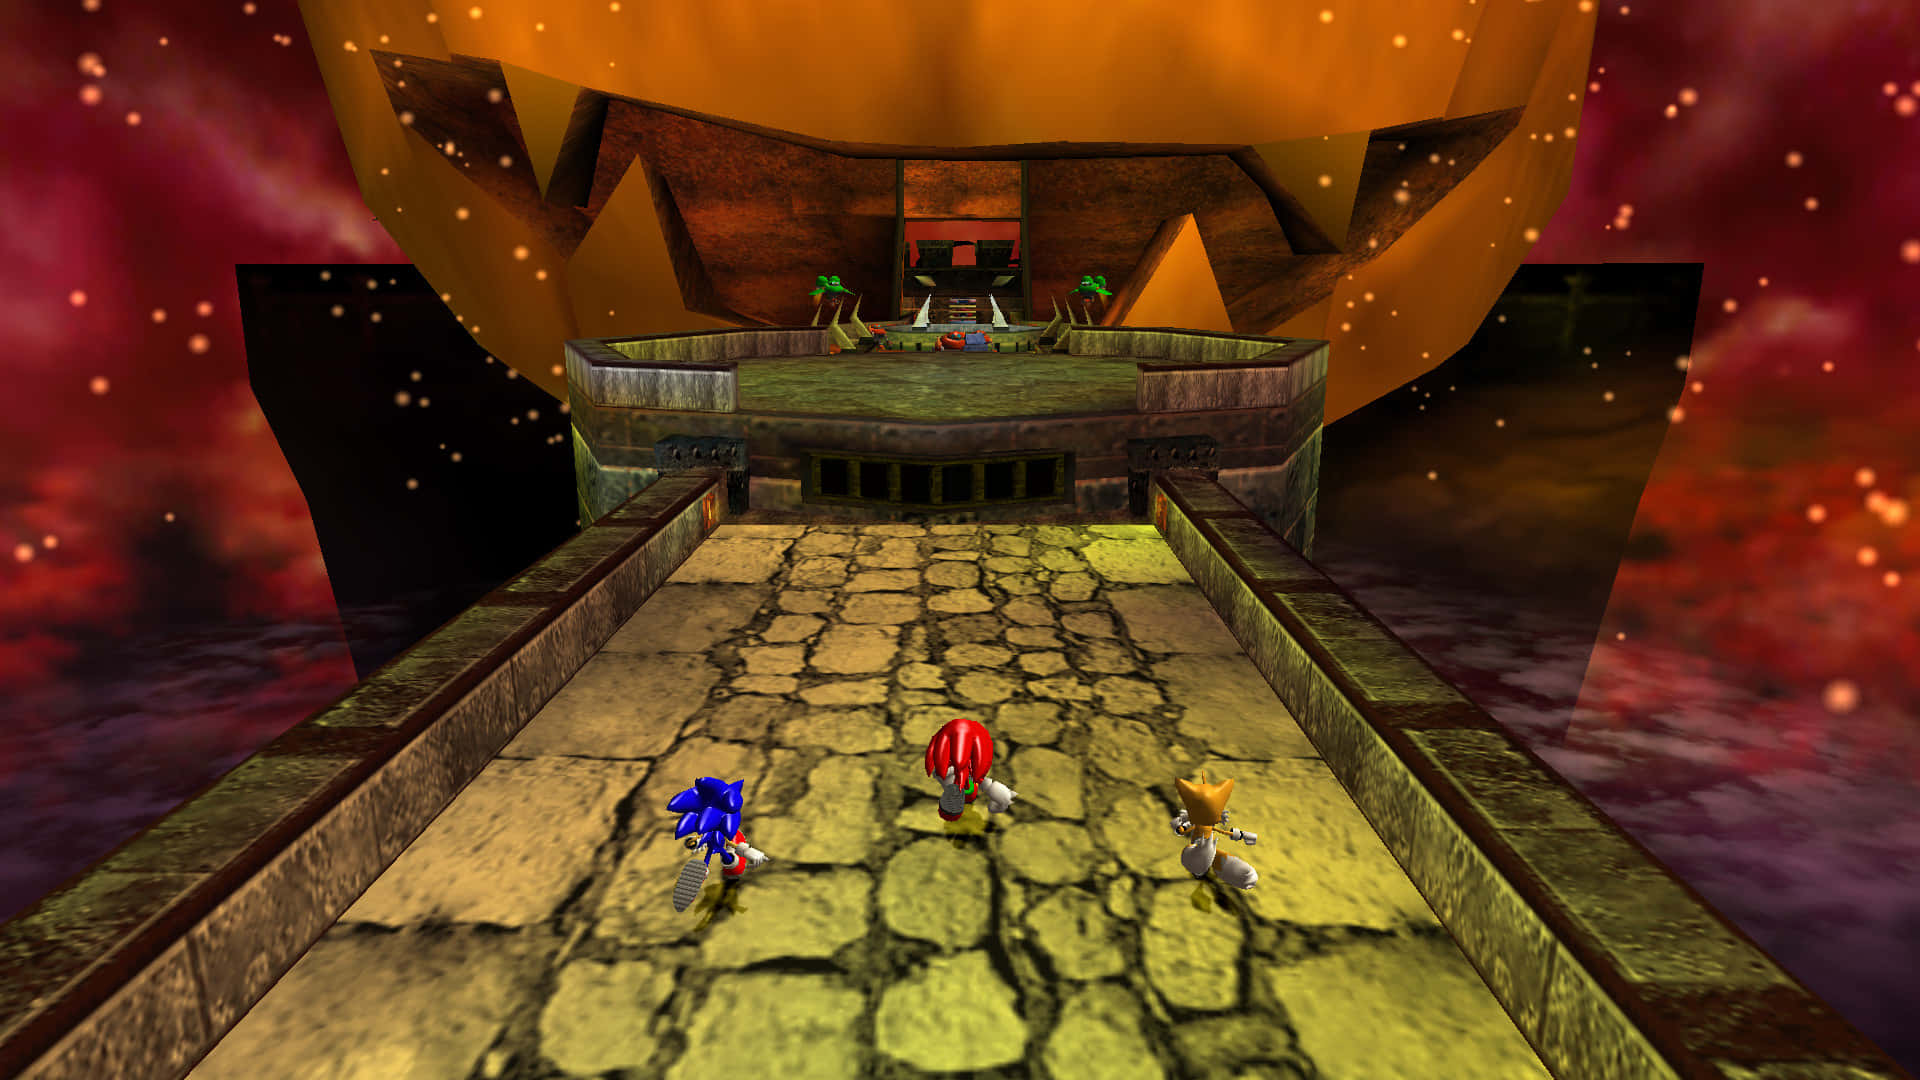 Chilling Adventure in Sonic Mystic Mansion Wallpaper